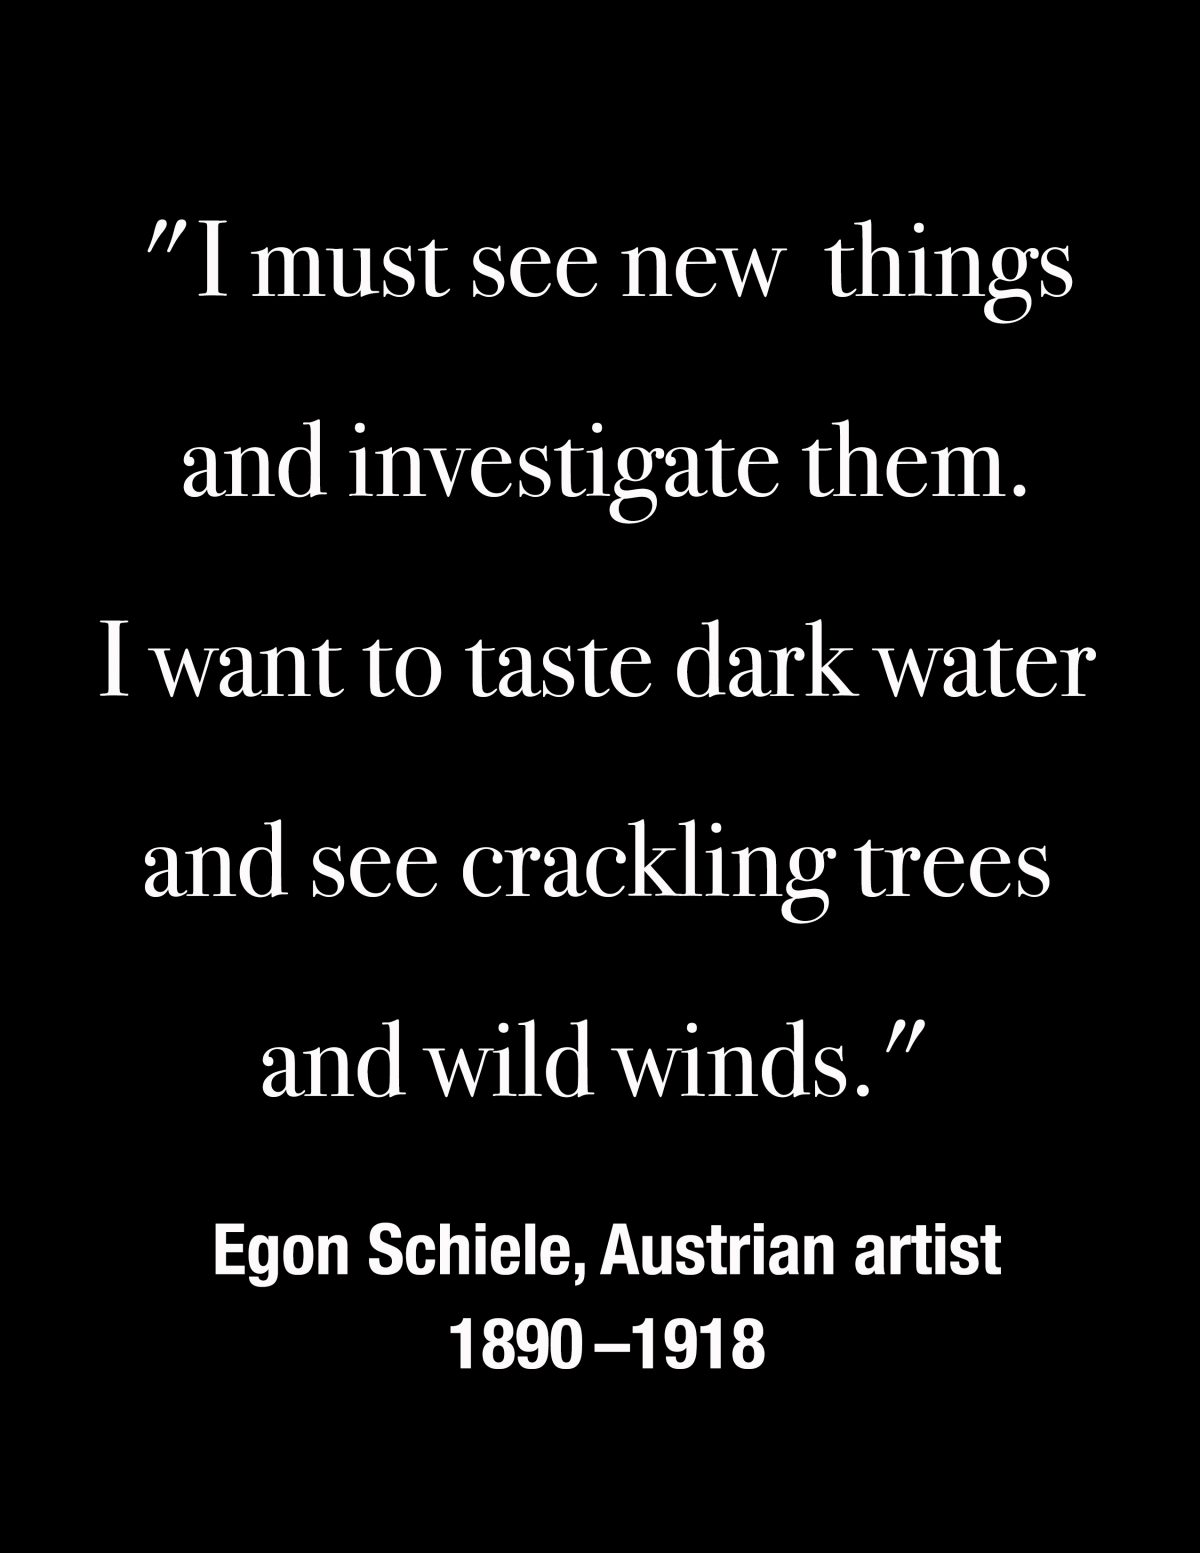 "I must see new things and investigate them. I want to taste dark water and see crackling trees and wild winds." -- Egon Schiele, Austrian artist 1890 - 1918